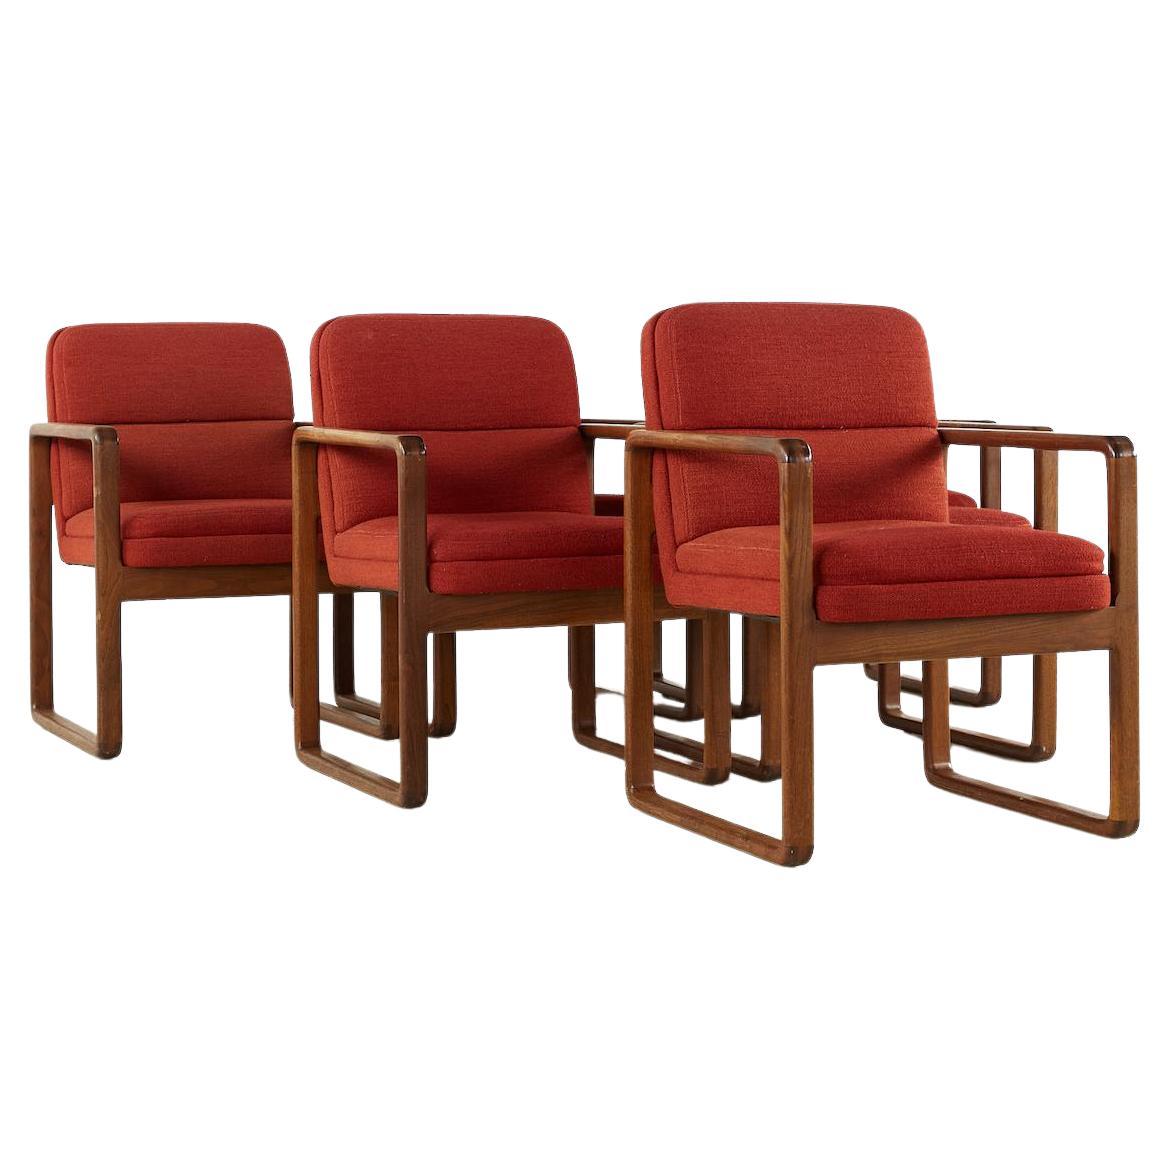 Milo Baughman Style Midcentury Oak Dining Chairs, Set of 6 For Sale